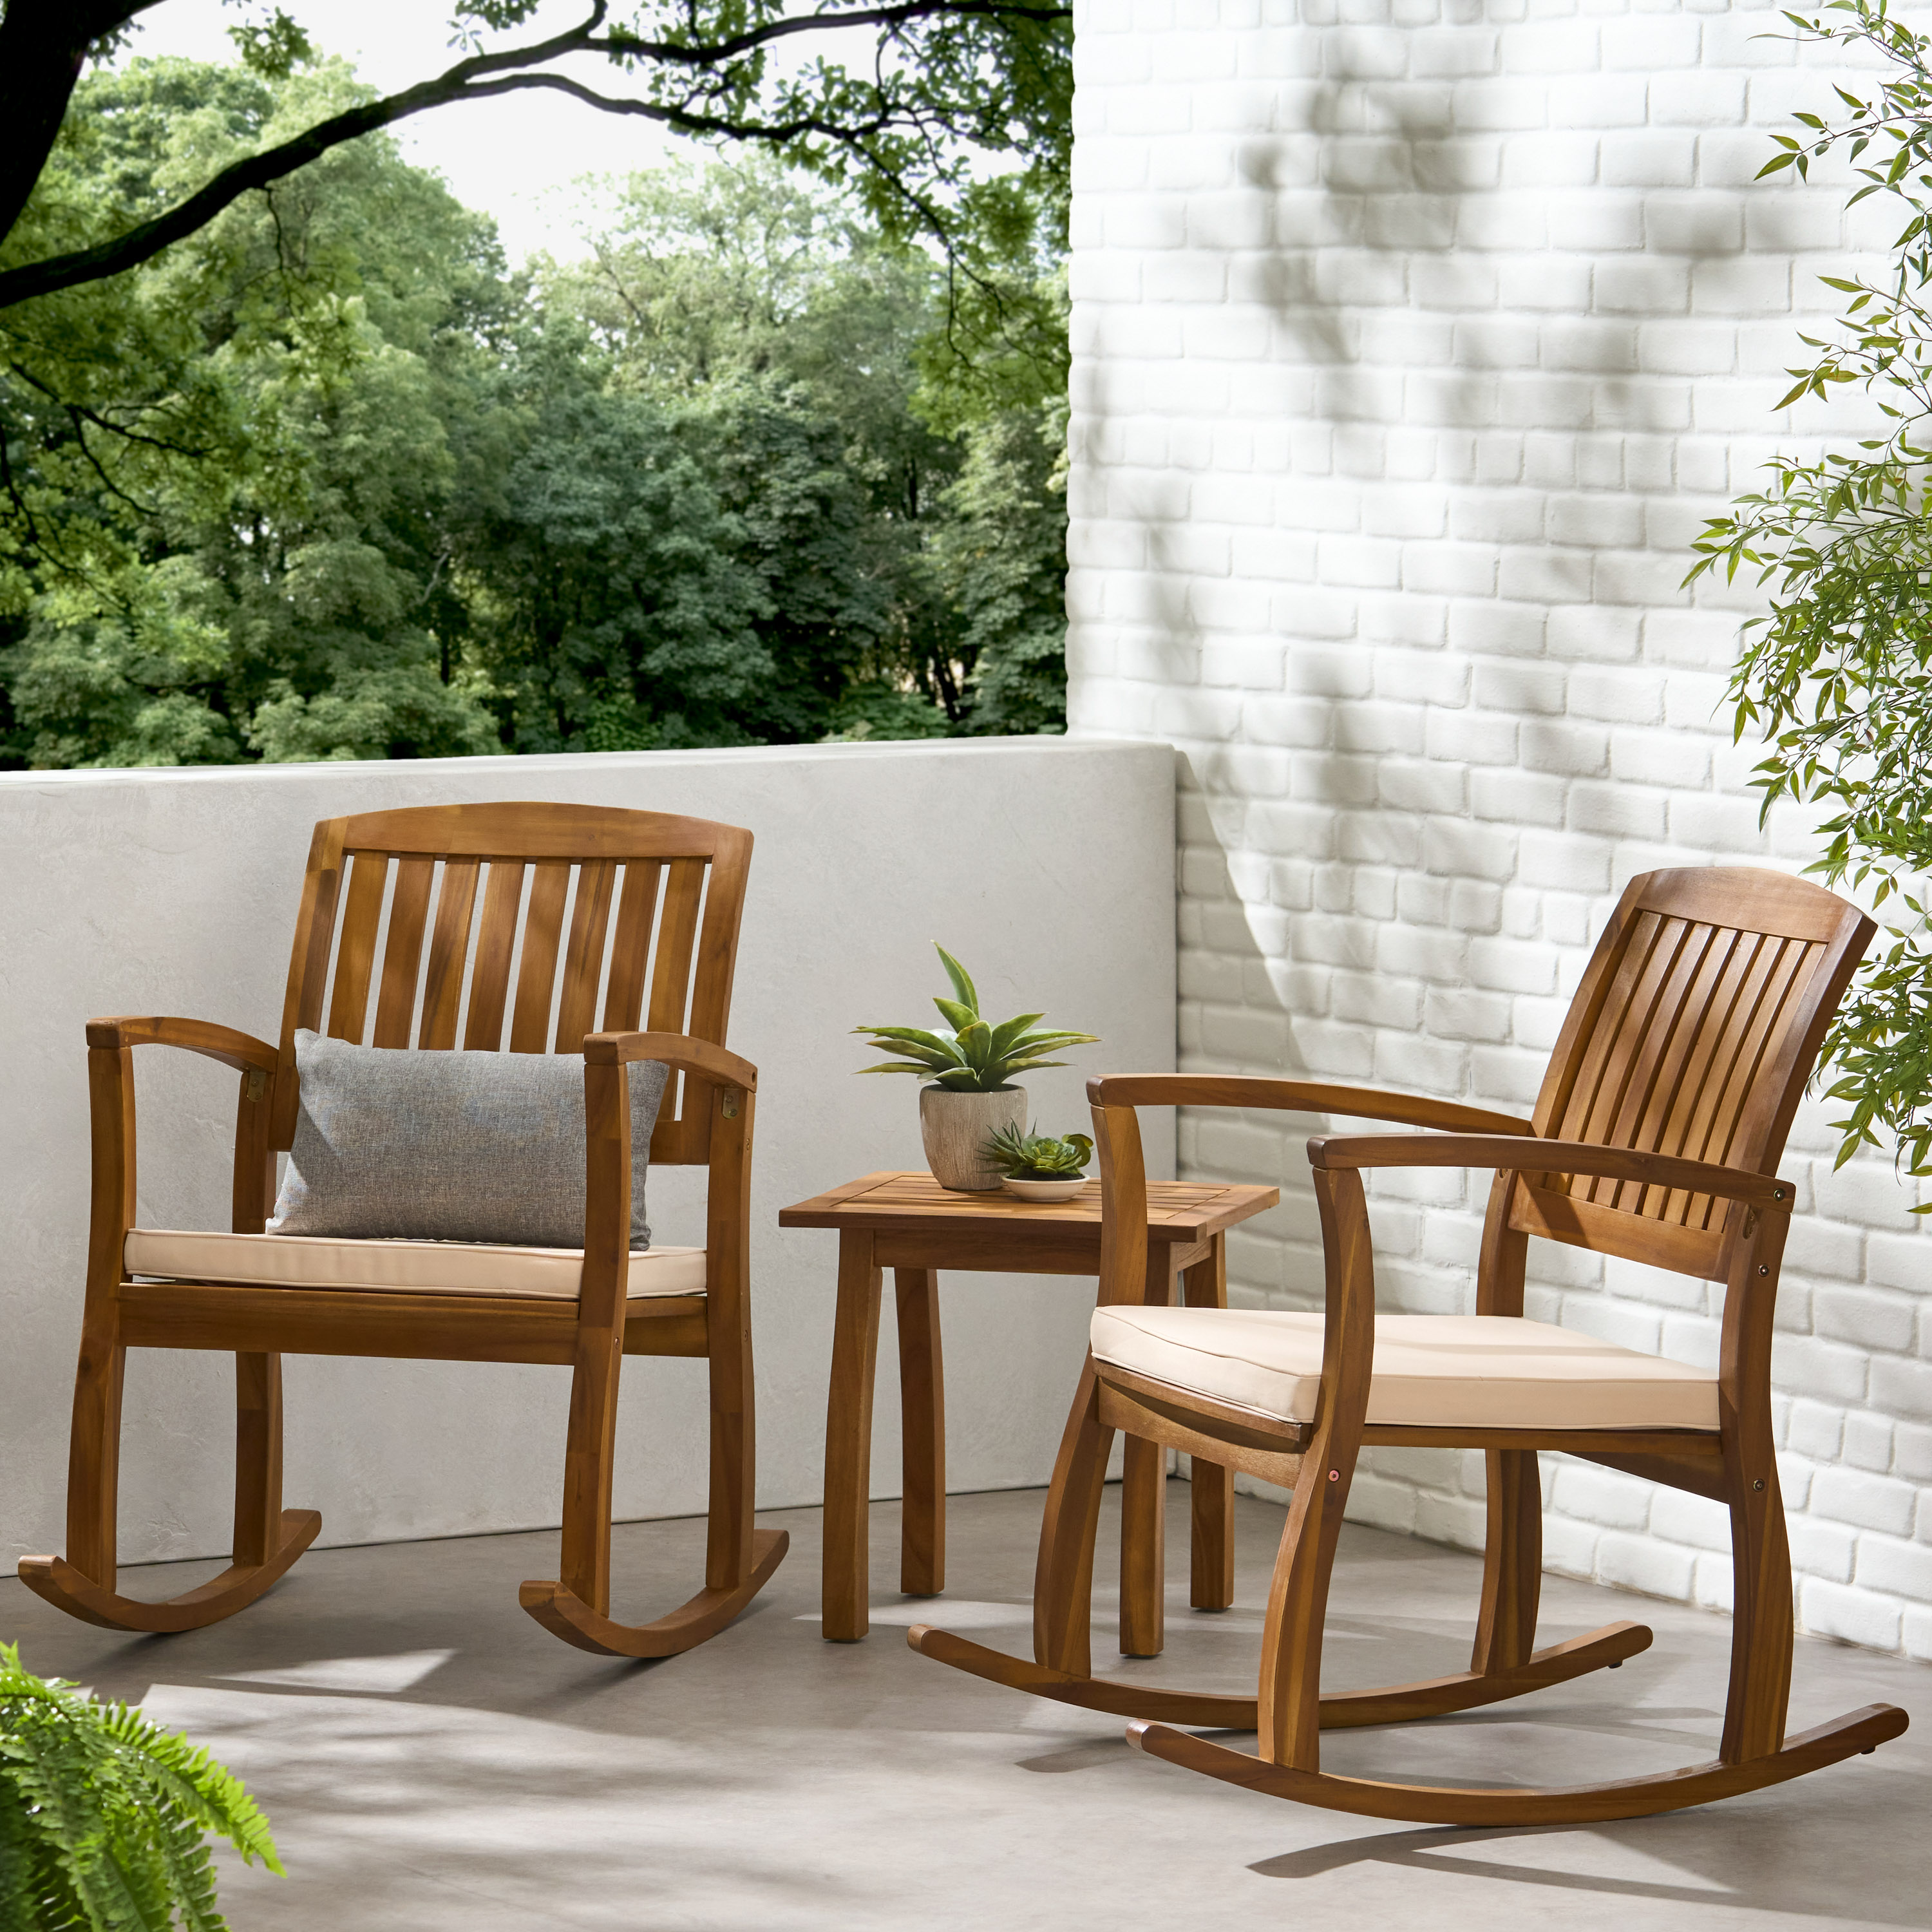 Hampton Acacia Rocking Chair with Cushion, Set of 2, and Acacia Accent Table, Teak Finish - image 1 of 12